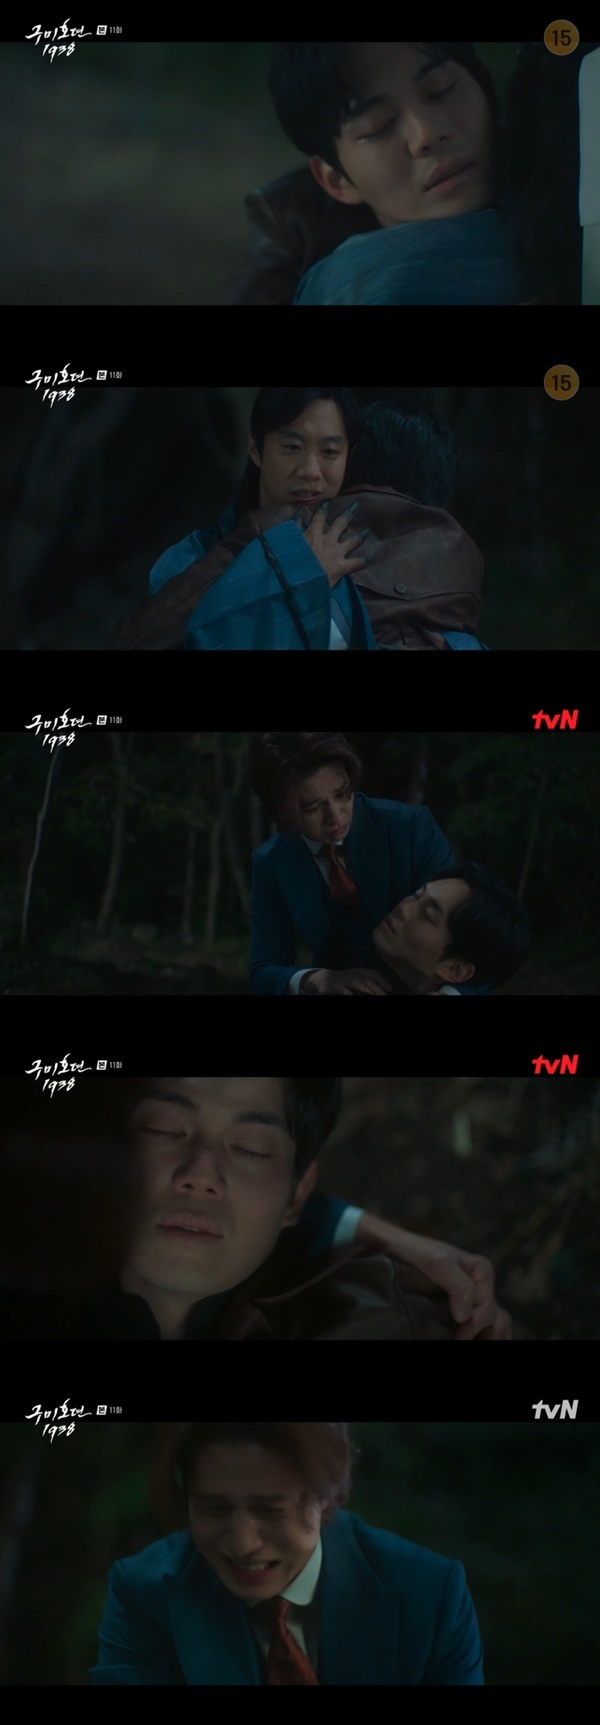 Shim Hui-seop, awakened by Ryu Kyong-su, was the first Shan Xin, not his older brother.Yiyeon (Lee Dong-wook) knew the real reason why he came to 1938 in the TVN Saturday drama  ⁇  Tale of the Nine Tailed 1938  ⁇  11th (playwright Han Woo-ri / director Kang Shin-hyo Cho Nam-hyung) broadcast on June 10th.Yiyeon said, After finishing the Japanese Y ⁇ kai mercenary corps, meet with the Taking Off faction (Kim Jong-un) and tell me honestly. It seems that this is not a coincidence.I asked all the way from the guardian stone to a golden rule, and the Taking Off wave said, In the beginning, Shan Xin was one, not four, and brought out the first Shan Xin story.Is Yiyeon the first Shan Xin?Yo-kai watch movie: Its the secret of birth.The Taking Off faction explained that the Yo-Kai Watch Movie: Its the Secret of Birth divided the first Shan Xin into four treasures and sealed them at different times, among them a guardian stone and a golden rule.Yiyeon came to the guardian stone stolen by heavenly radish spirit (Ryu Kyong-su) in 1938 and got a golden rule.The Taking Off wave warned that  ⁇ guardian stone and a golden rule should not be in the same time zone. They attract each other like magnets.Taking Off, the heavenly radish spirit is trying to wake up something with a golden rule, and heavenly radish spirit is the first Shan Xin, not his brother.Taking Off said, Now he is just an empty vessel. If you want to catch him, you have to wake him up. That is my duty to keep this age.Yiyeon said, Then who keeps the mu-young? We are not a grandmothers long-term horse. If you are abandoned by your grandmother, you are hurt.I want to live even if I beg for time. I was angry and ran to save heavenly radish spirit, but it was too late.Heavenly radish spirit is not your brother after you wake up the first Shan Xin, thinking it is your brother. Thank you for your hard work. North Shan Xin. I was surprised to hear that your role is here.Shan Xin is said to be the first Shan Xin. Its because of me that your brother went crazy. Its also me that told you how to save your brother. I had to find my scattered power. Its dim in front of you, isnt it? Its the light of death.You have stopped the heart of heavenly radish spirit, saying that you look good.Is heavenly radish spirit here? In a place where there is no one. Is it my ending to die without anyone to grieve? I wanted to see ryu Hong-ju (Kim So-yeon) for the last time, Yiyeon!When I ran, I closed my eyes with the words I was guilty of you. Hong-ju protect me. Yiyeon said, Do not die.